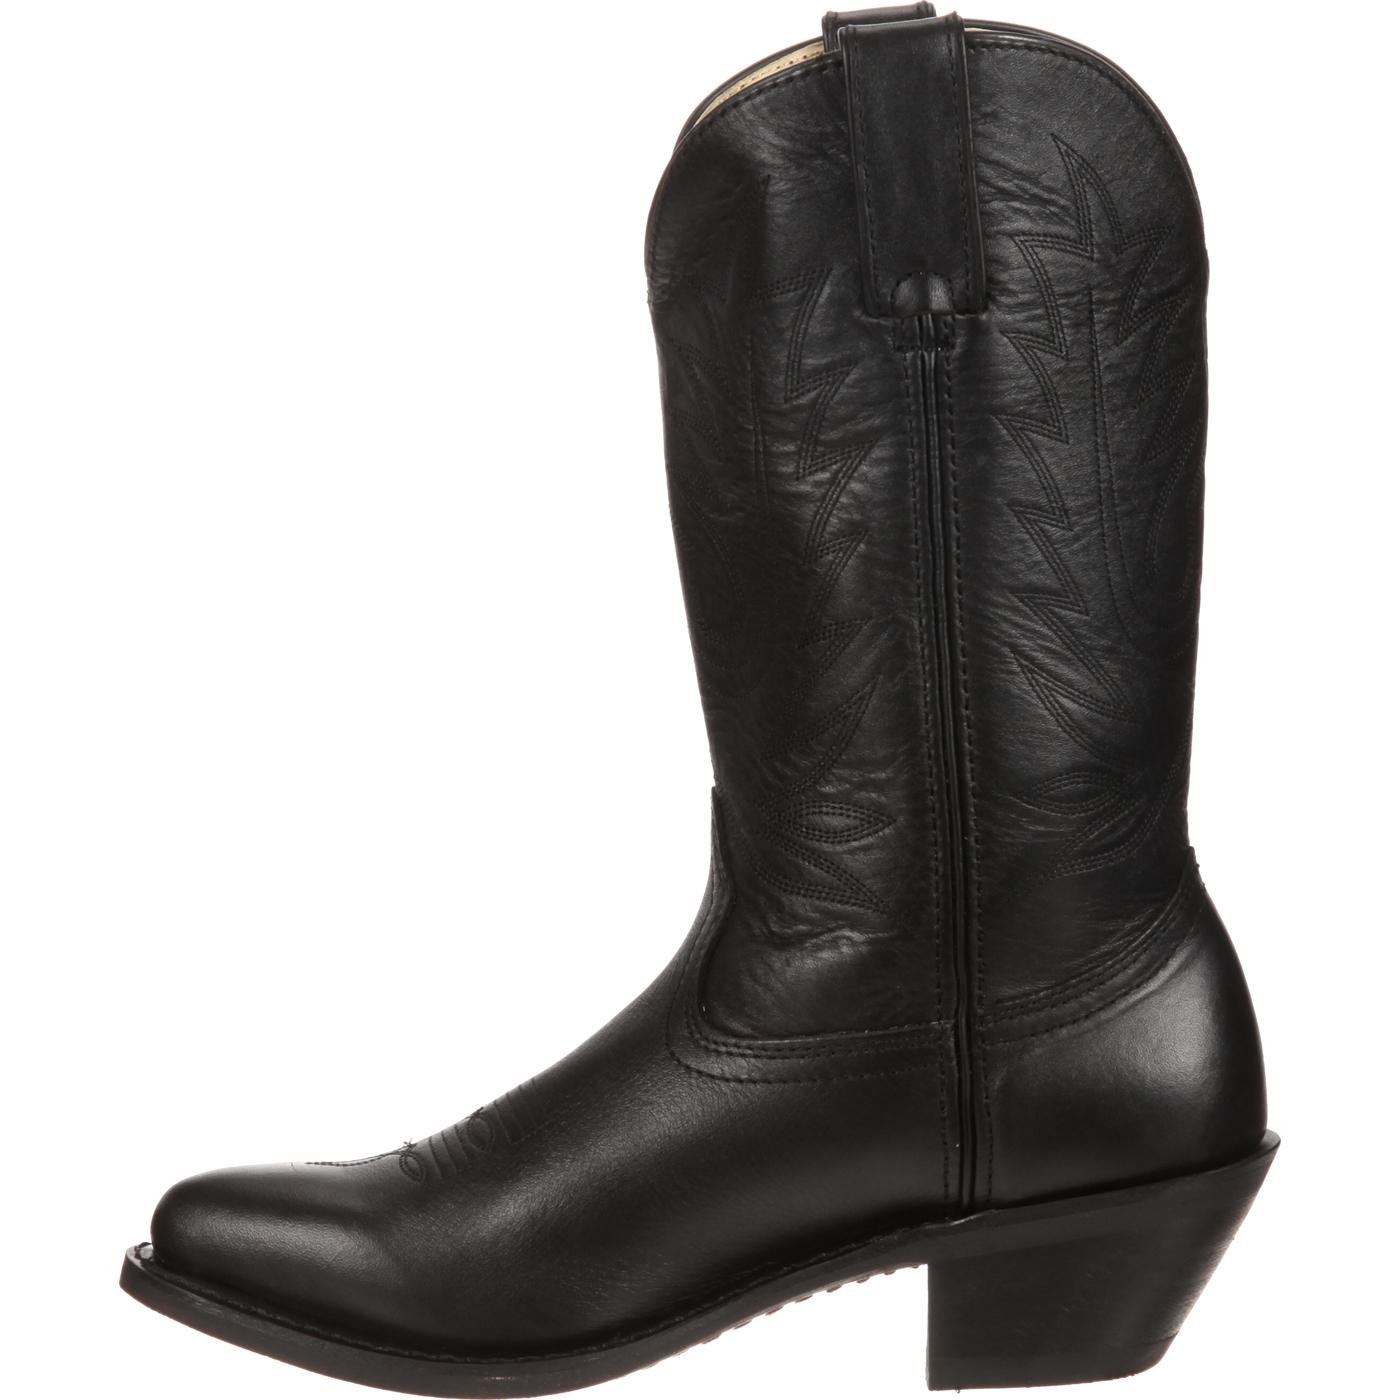 Durango: Women's Black Leather Western Boots, style #RD4100